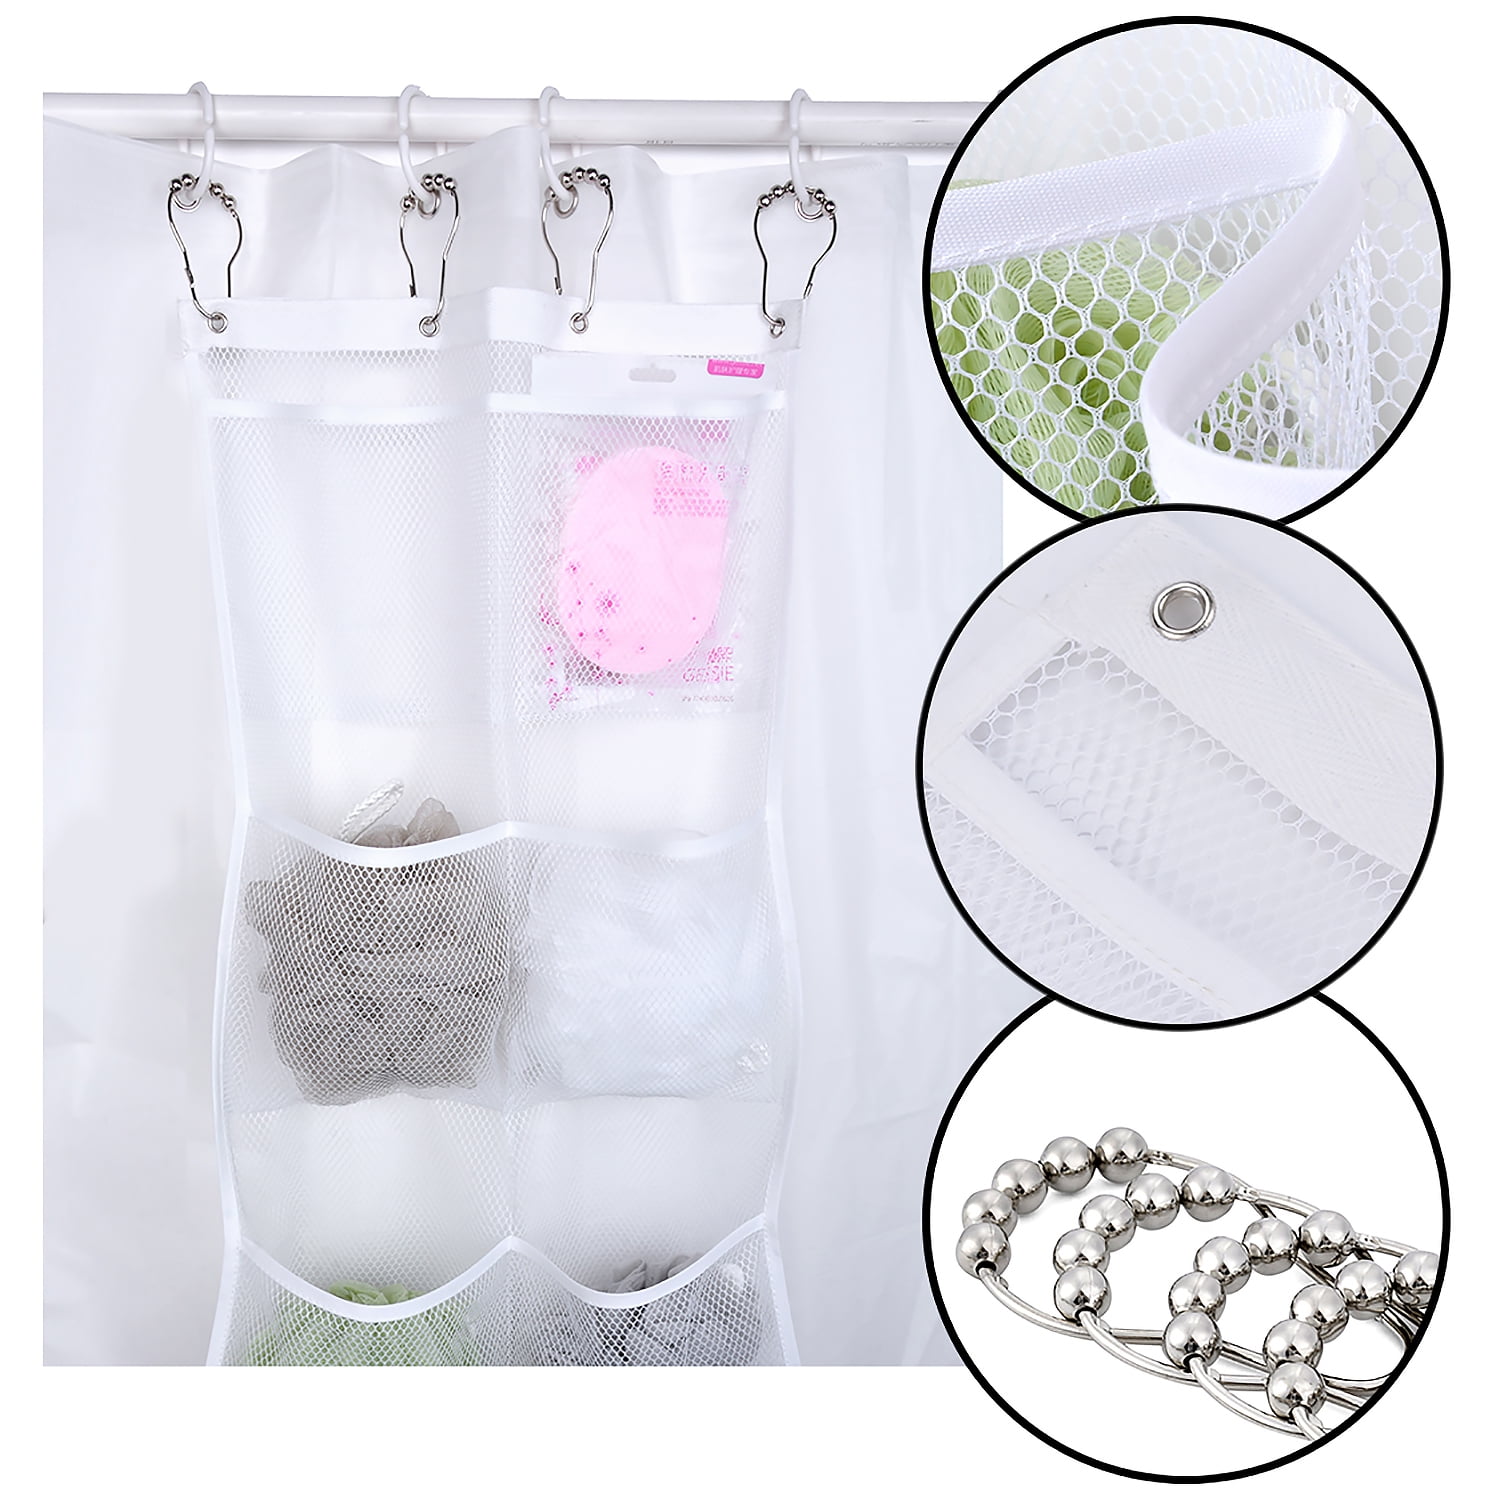 Quick Dry Mesh Bathroom Organizer Details about   Hanging Shower Caddy 